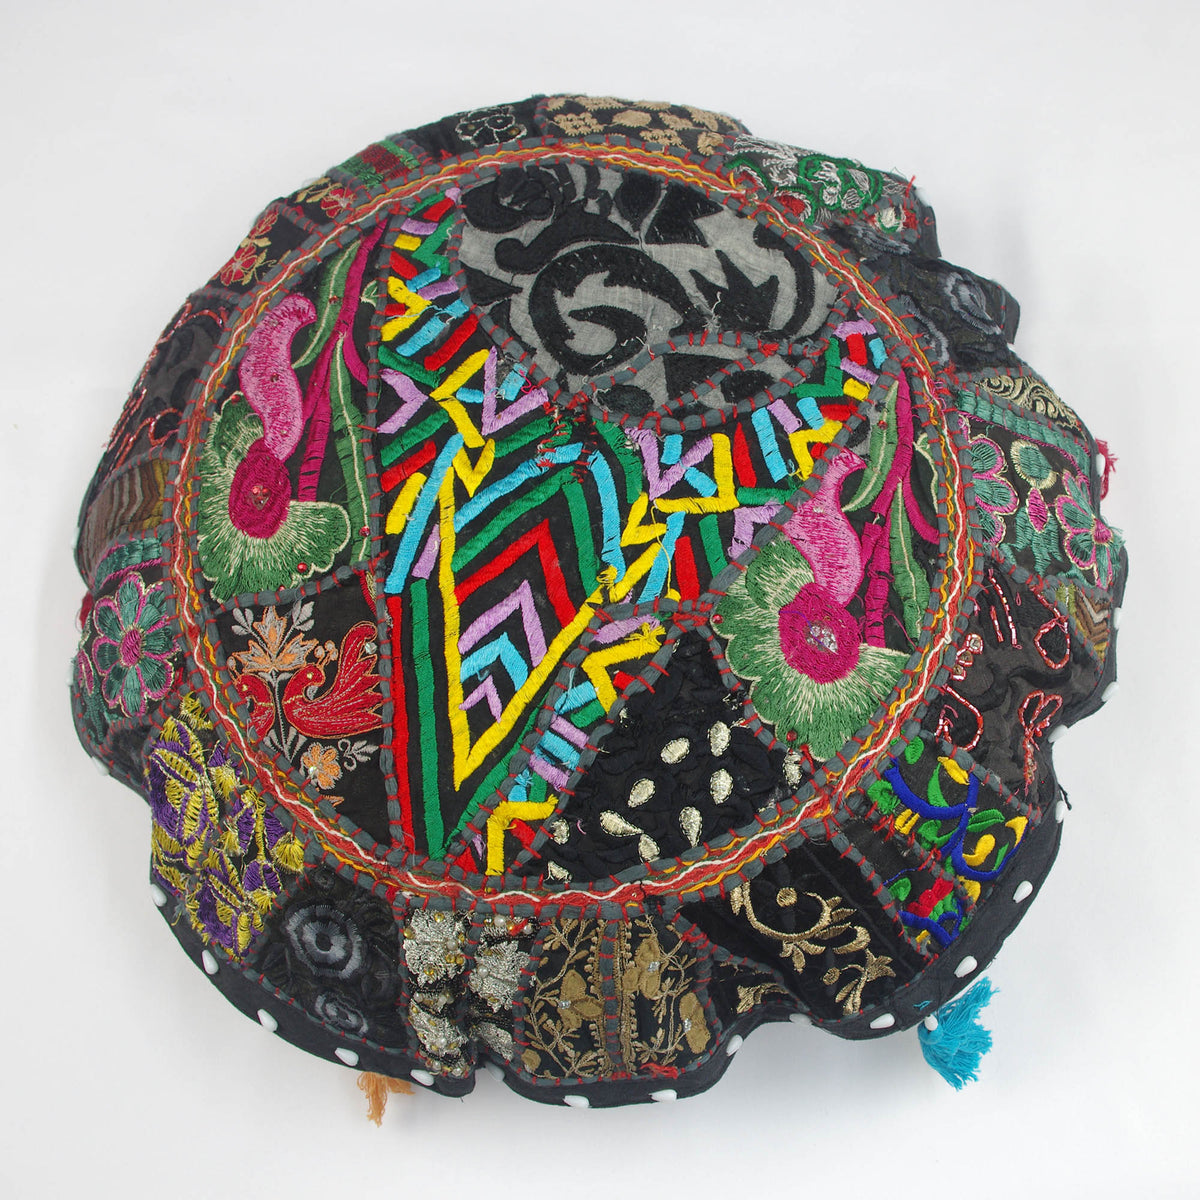 Black Multi Round Floor Embroidered Patchwork Pouf Ottoman Indian Vintage Cushion Cover 18"